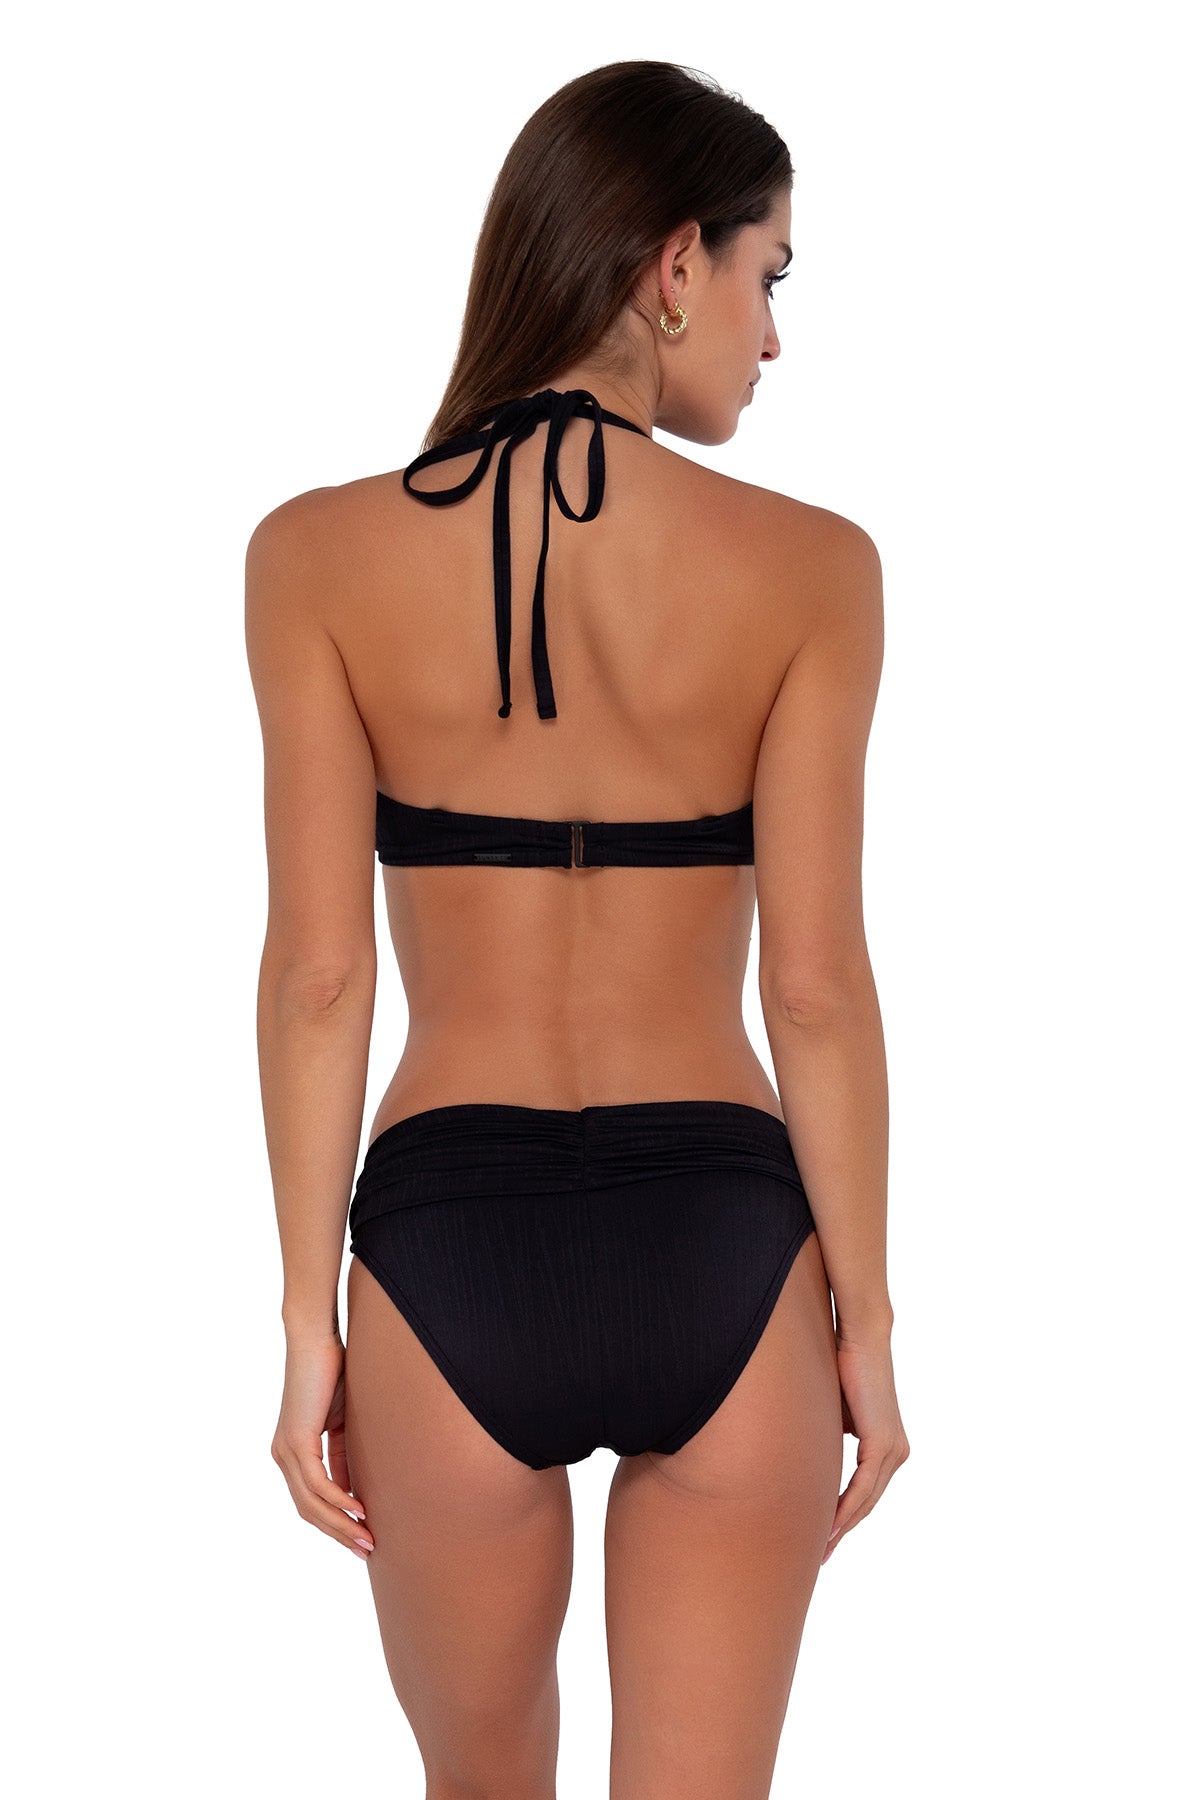 Back pose #1 of Gigi wearing Sunsets Black Seagrass Texture Brooke U-Wire Top as a halter bikini paired with Unforgettable Bottom swim hipster